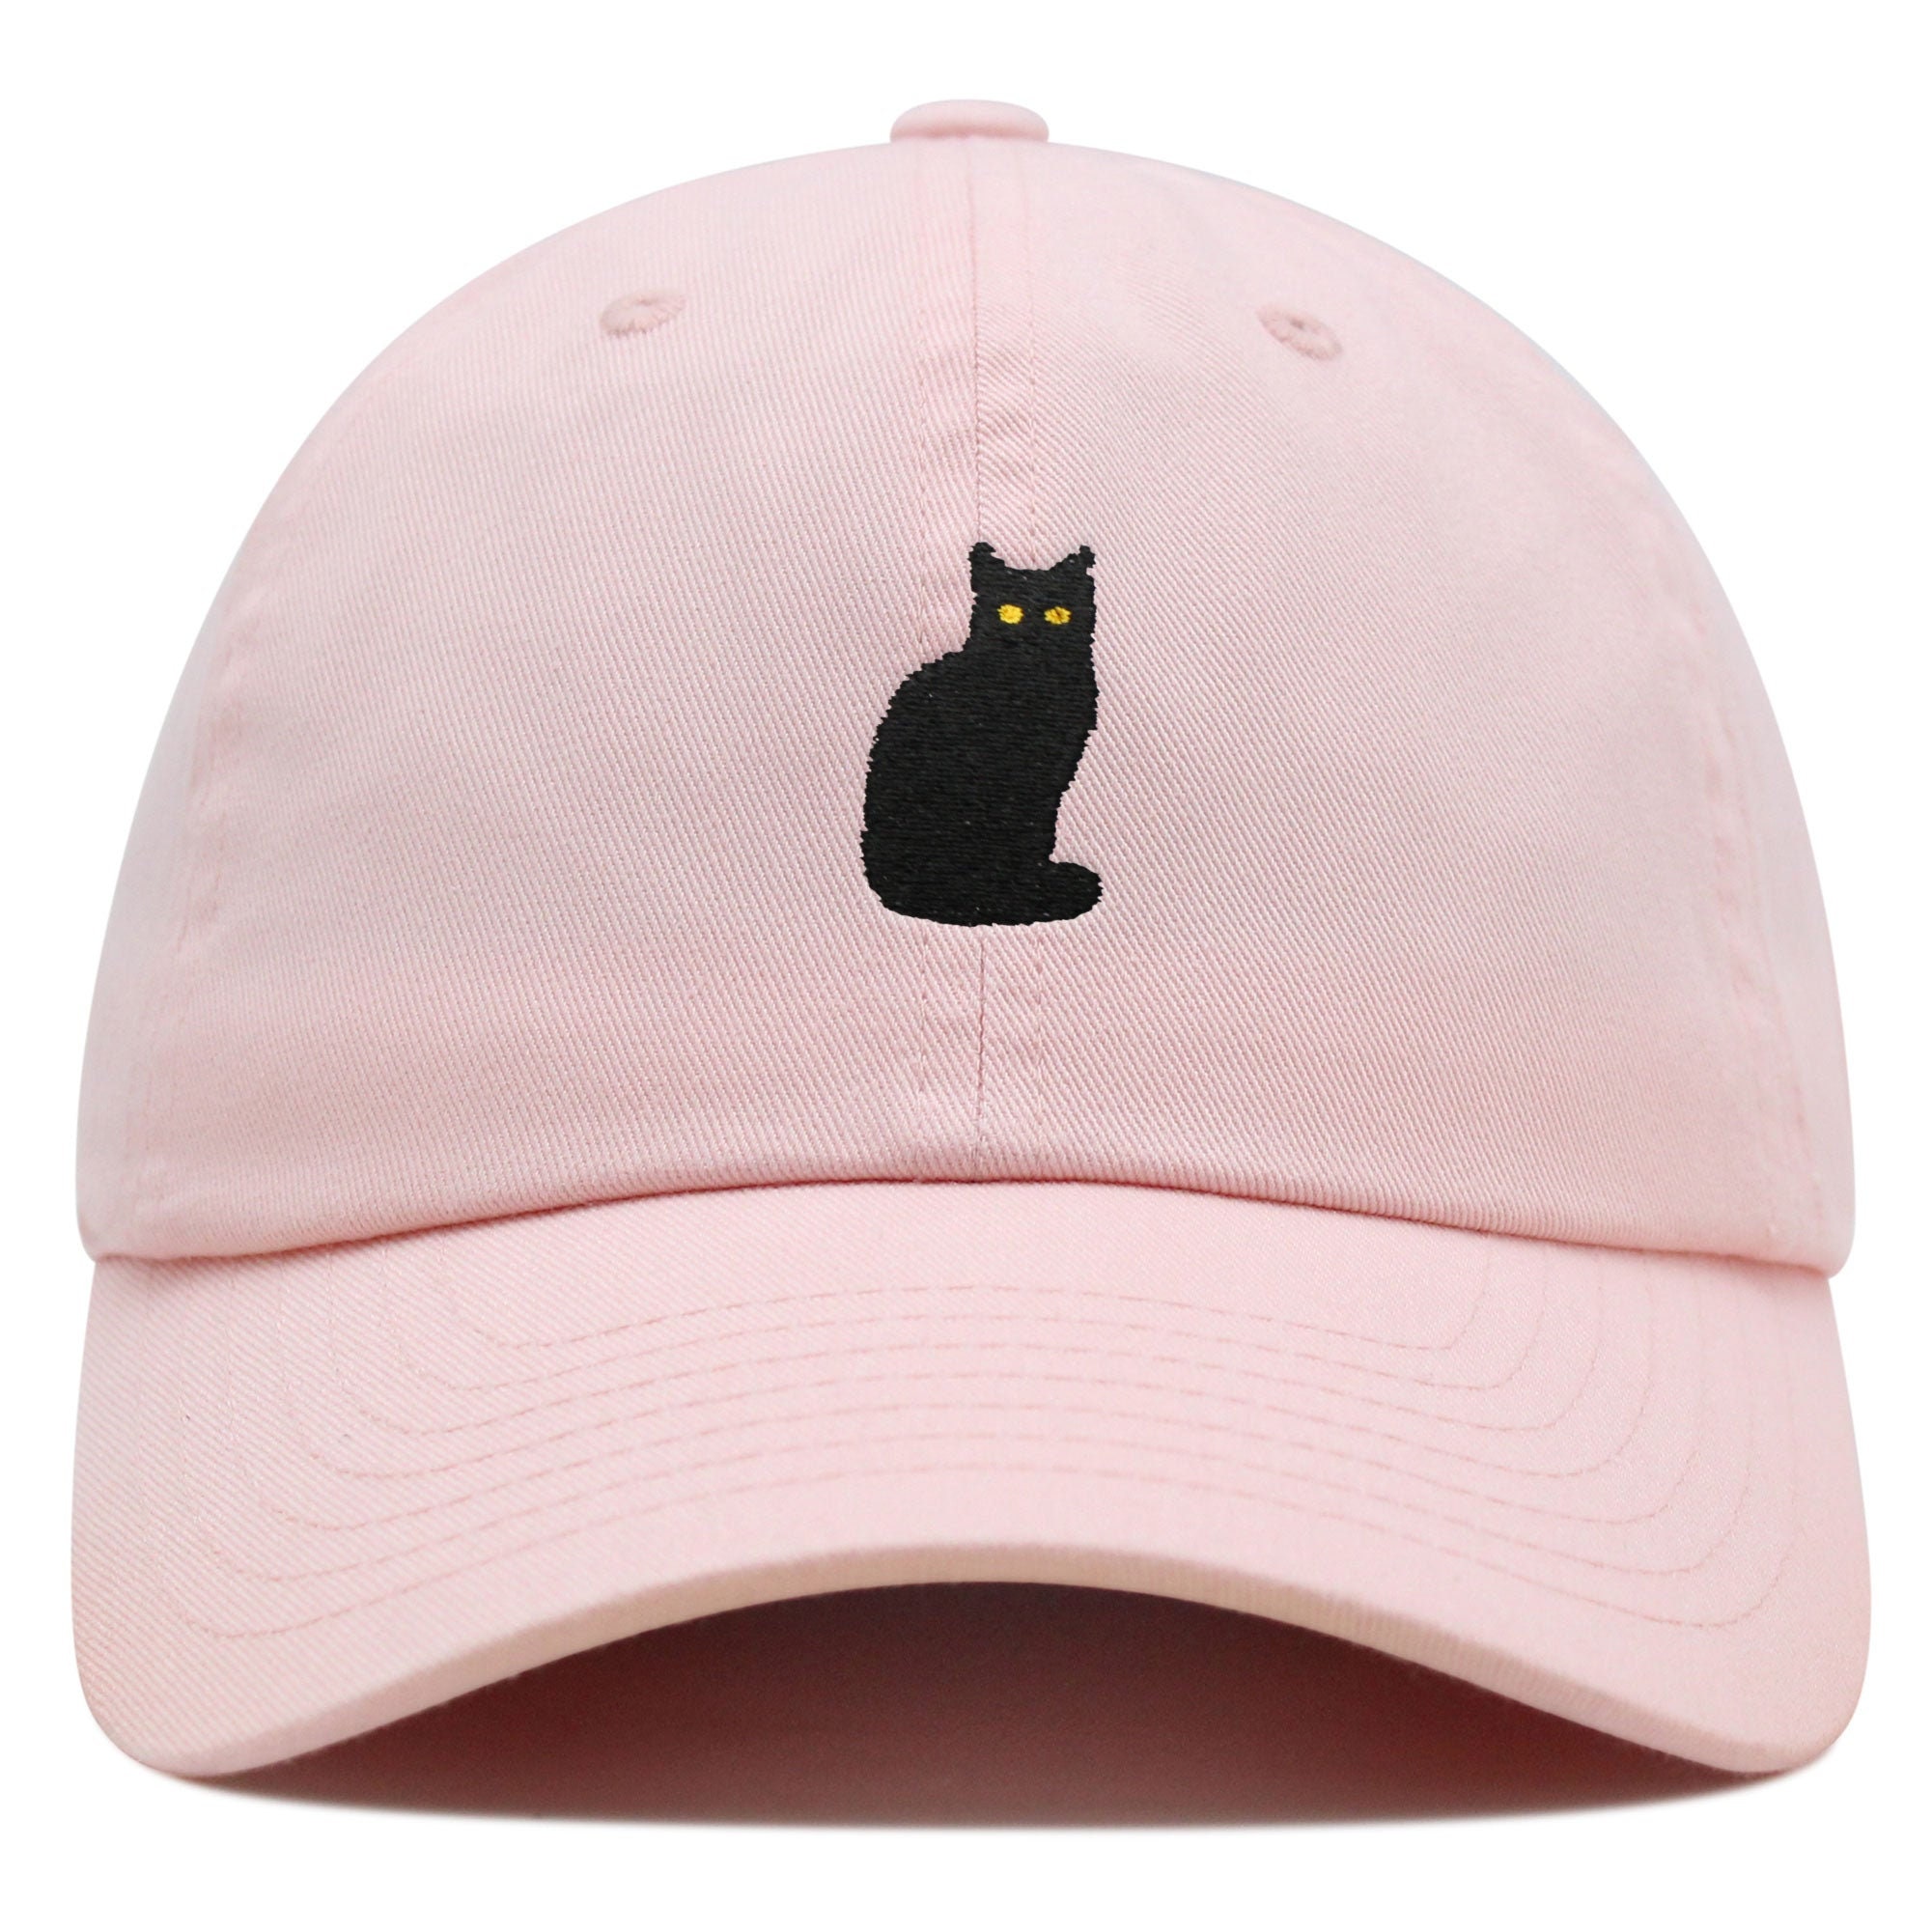 Sitted Black Cat Premium Dad Hat Embroidered Baseball Cap Cute Kitty